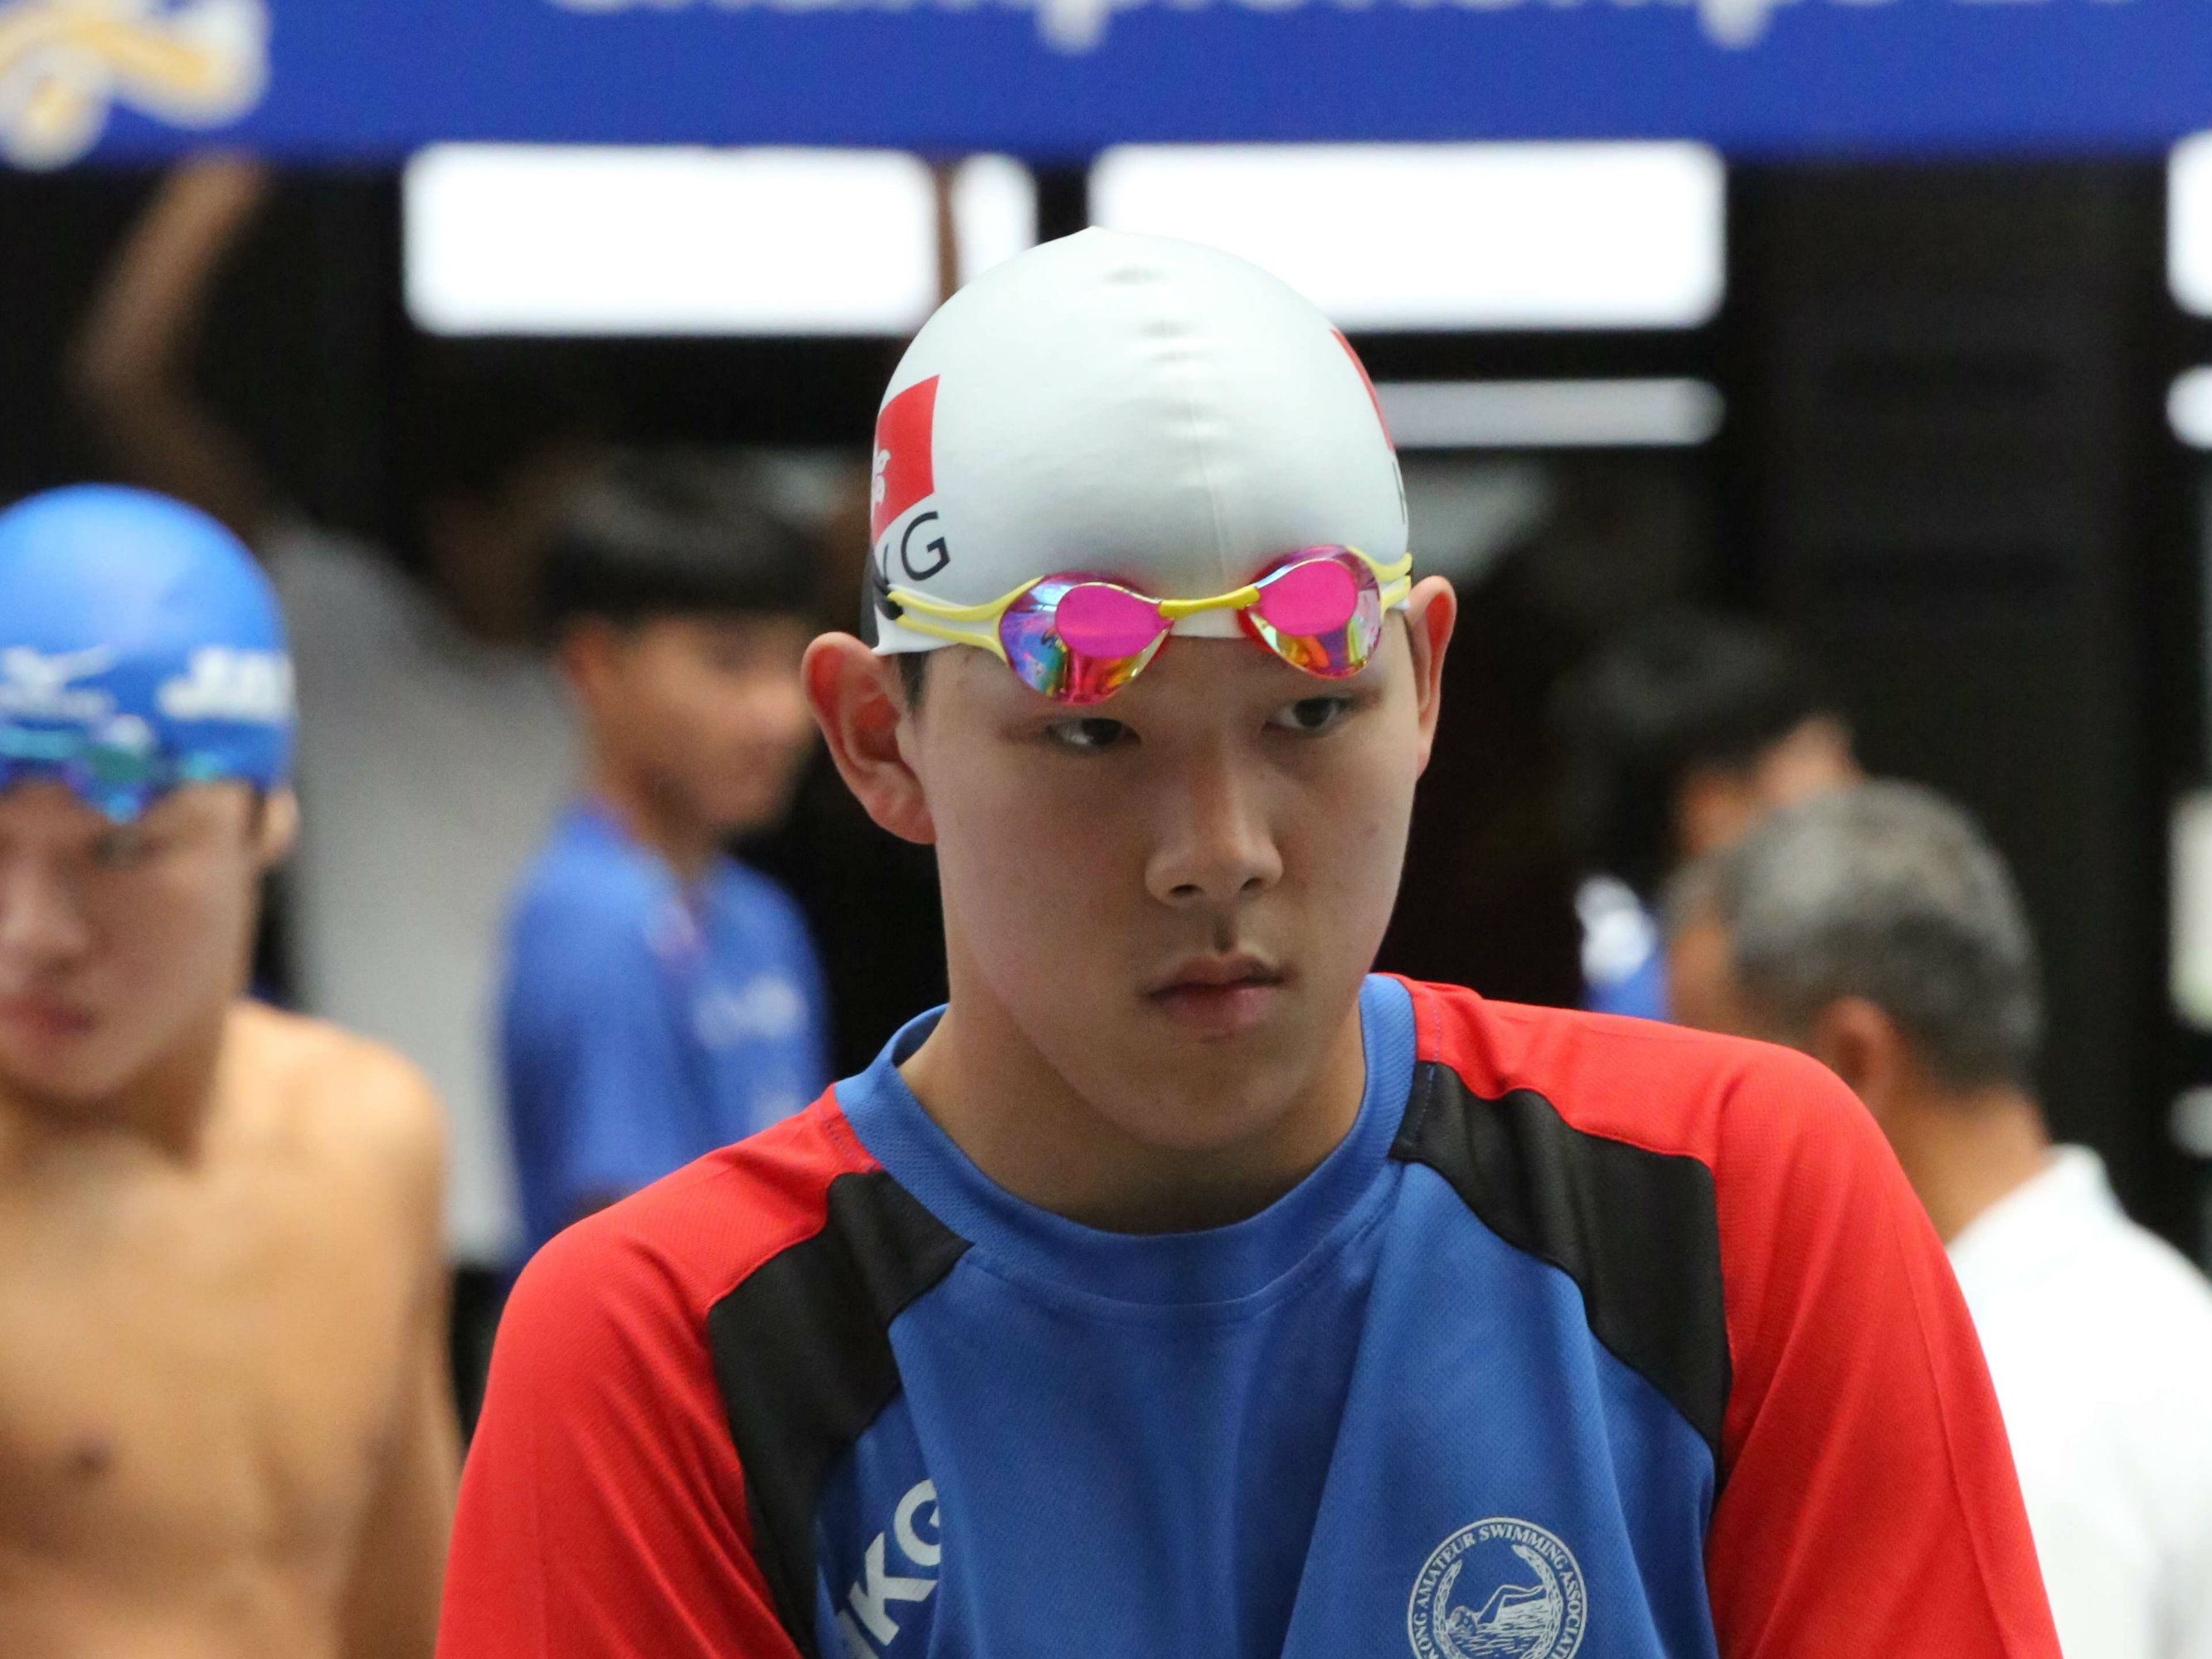 Jonathan Liao Xian-hao, age 16 and a student at German Swiss International School has broken Hong Kong records in swimming.